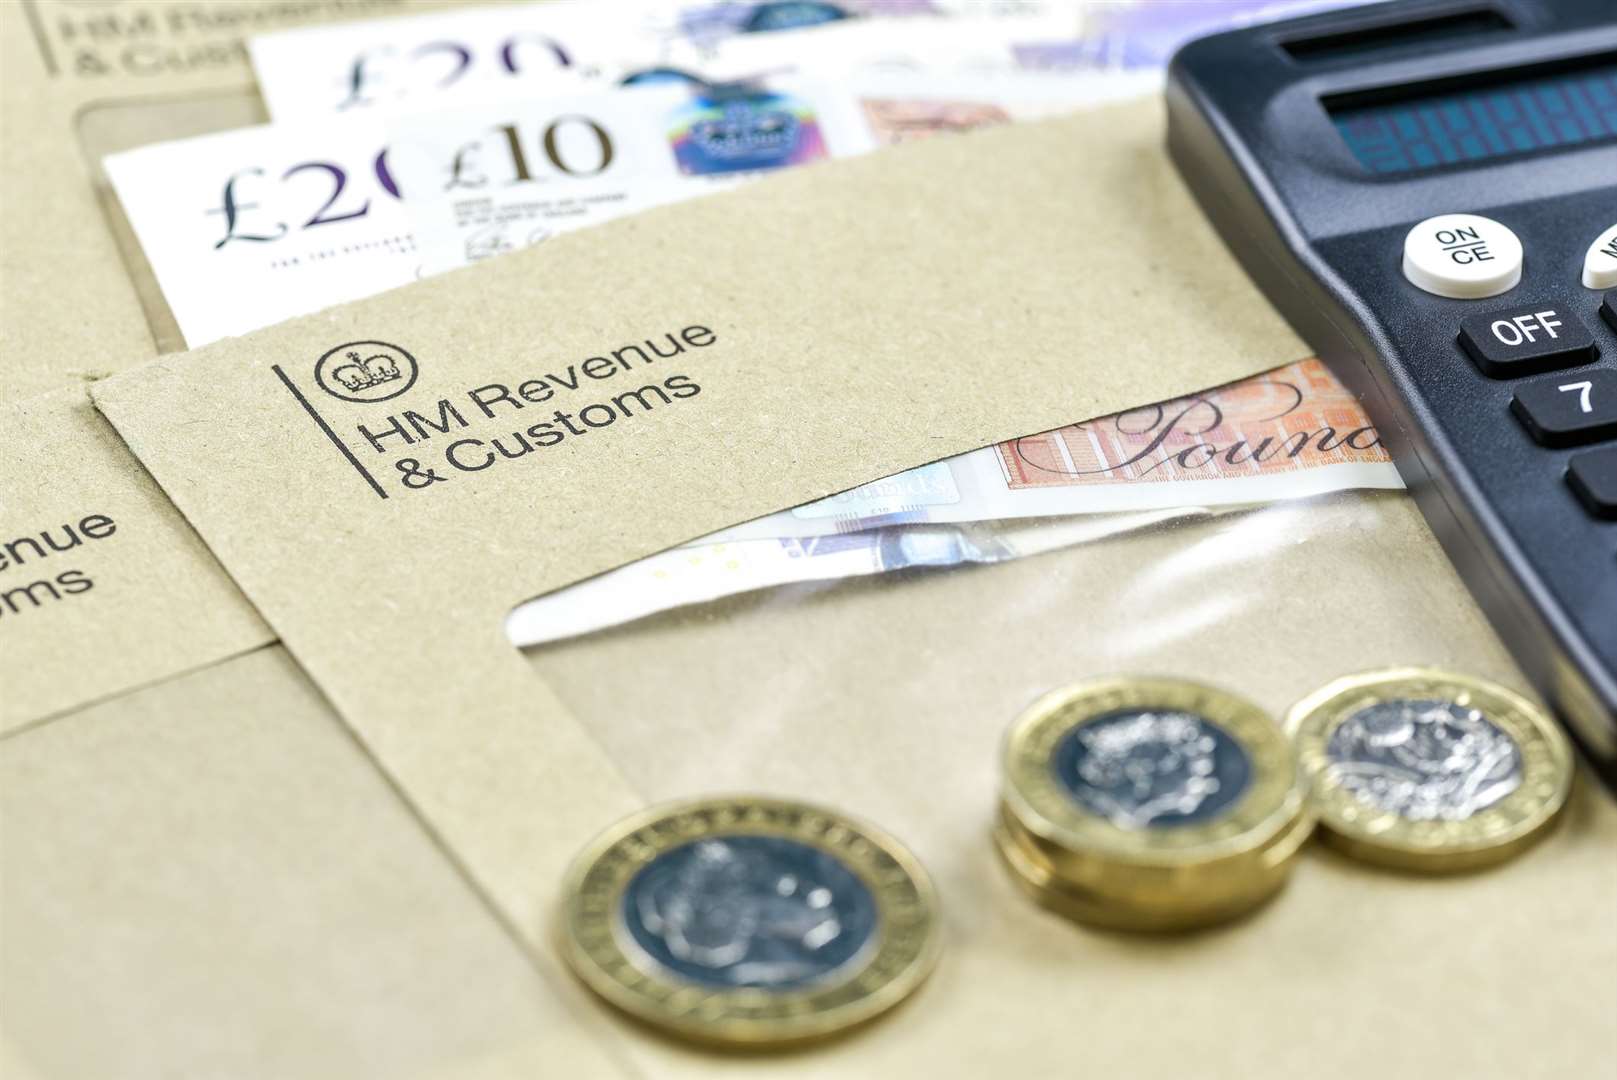 The changes apply to HMRC customers getting money through Post Office card accounts